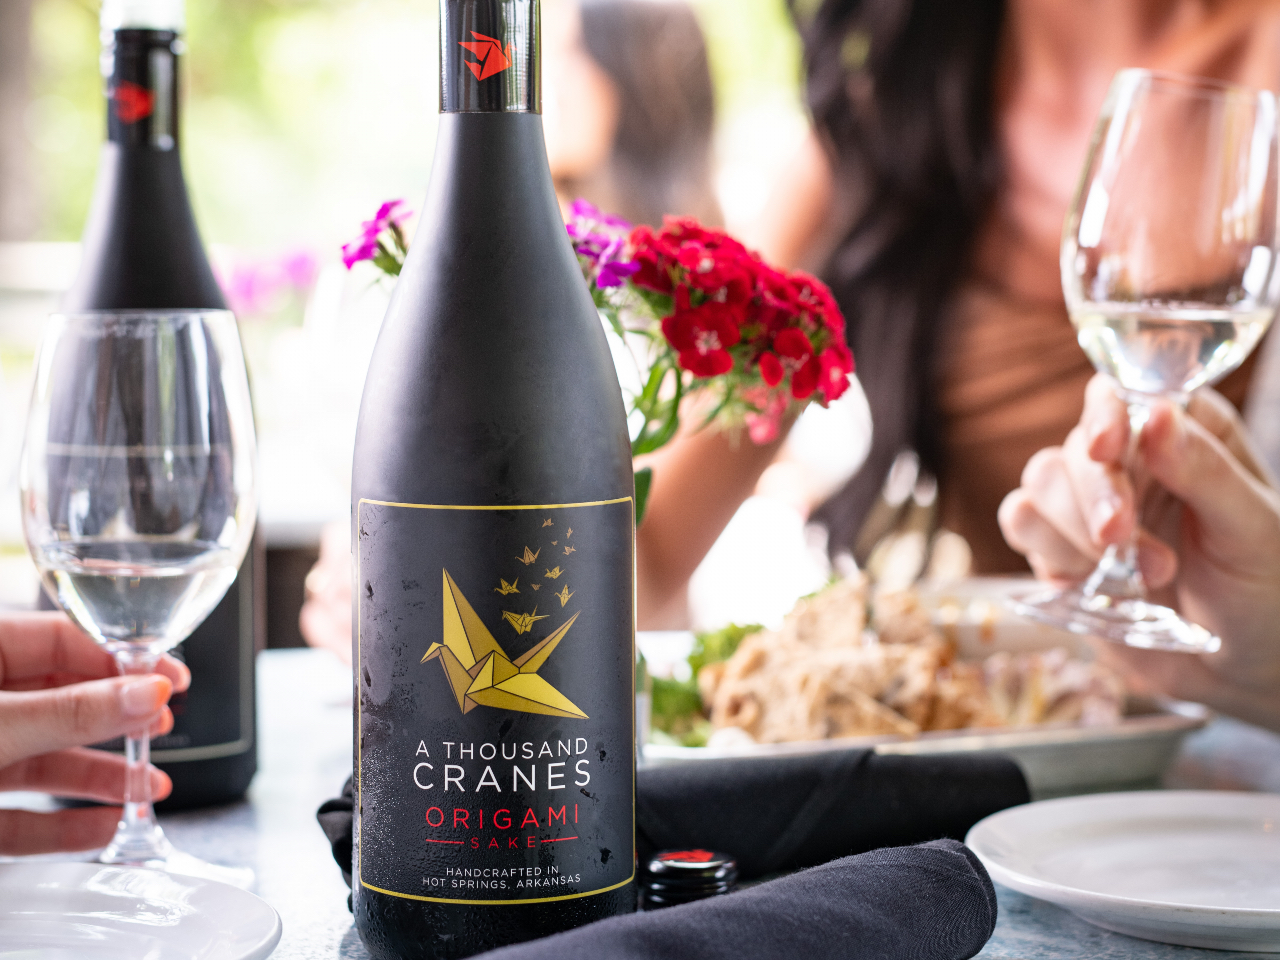 Close-up photo of a bottle of A Thousand Cranes Origami Sake on a table with people holding glasses in the background.